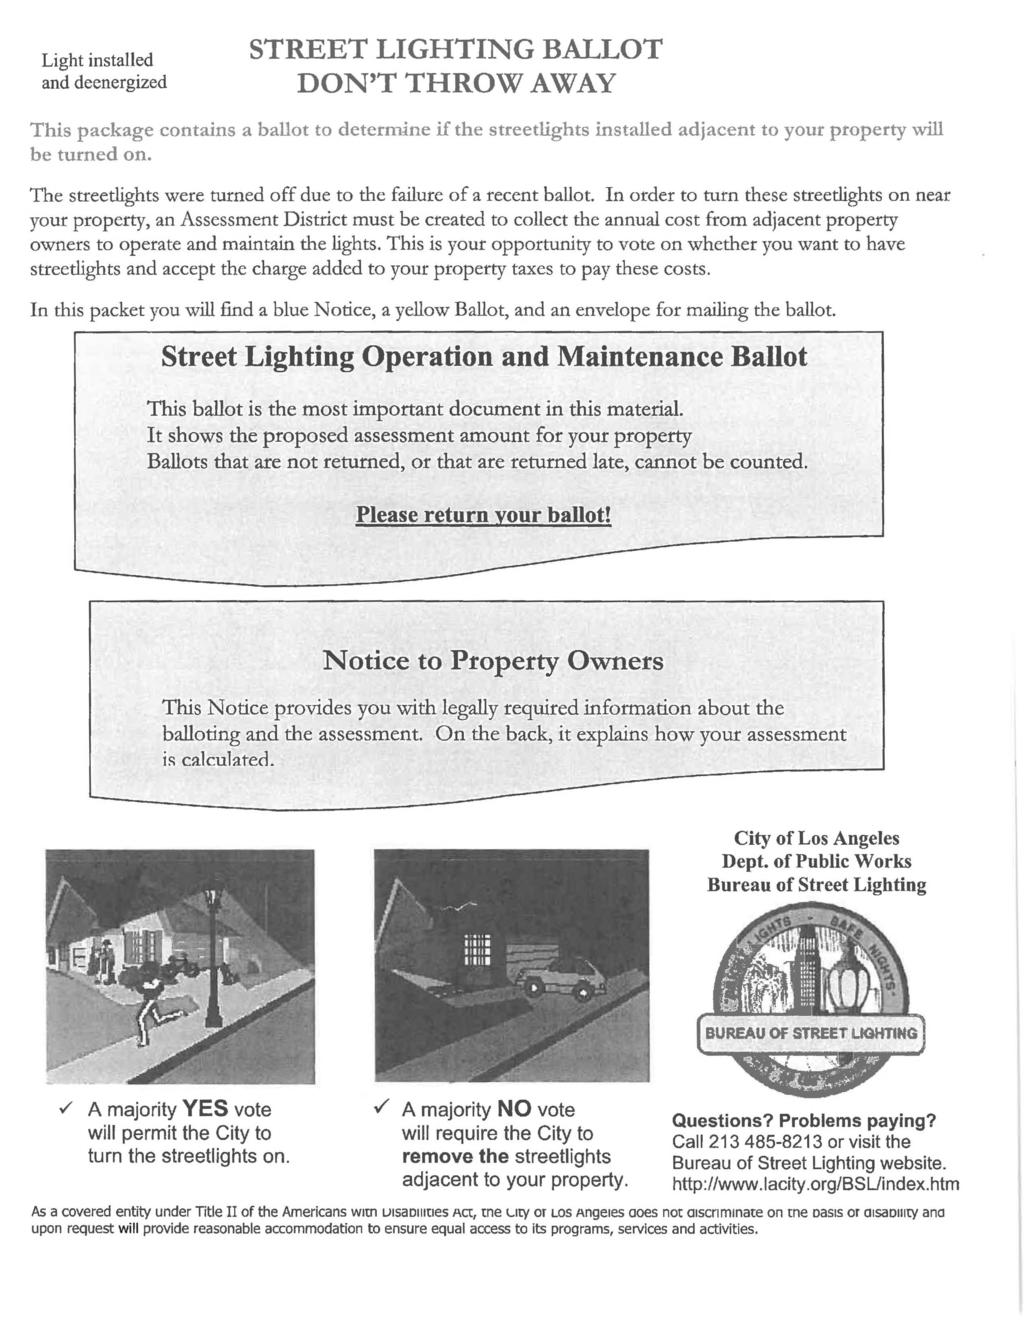 Lght nstalled and deenergzed STREET LIGHTING BALLOT DON T THROW AWAY Ths package contans a ballot to determne f the streetlghts nstalled adjacent to your property wll be turned on.